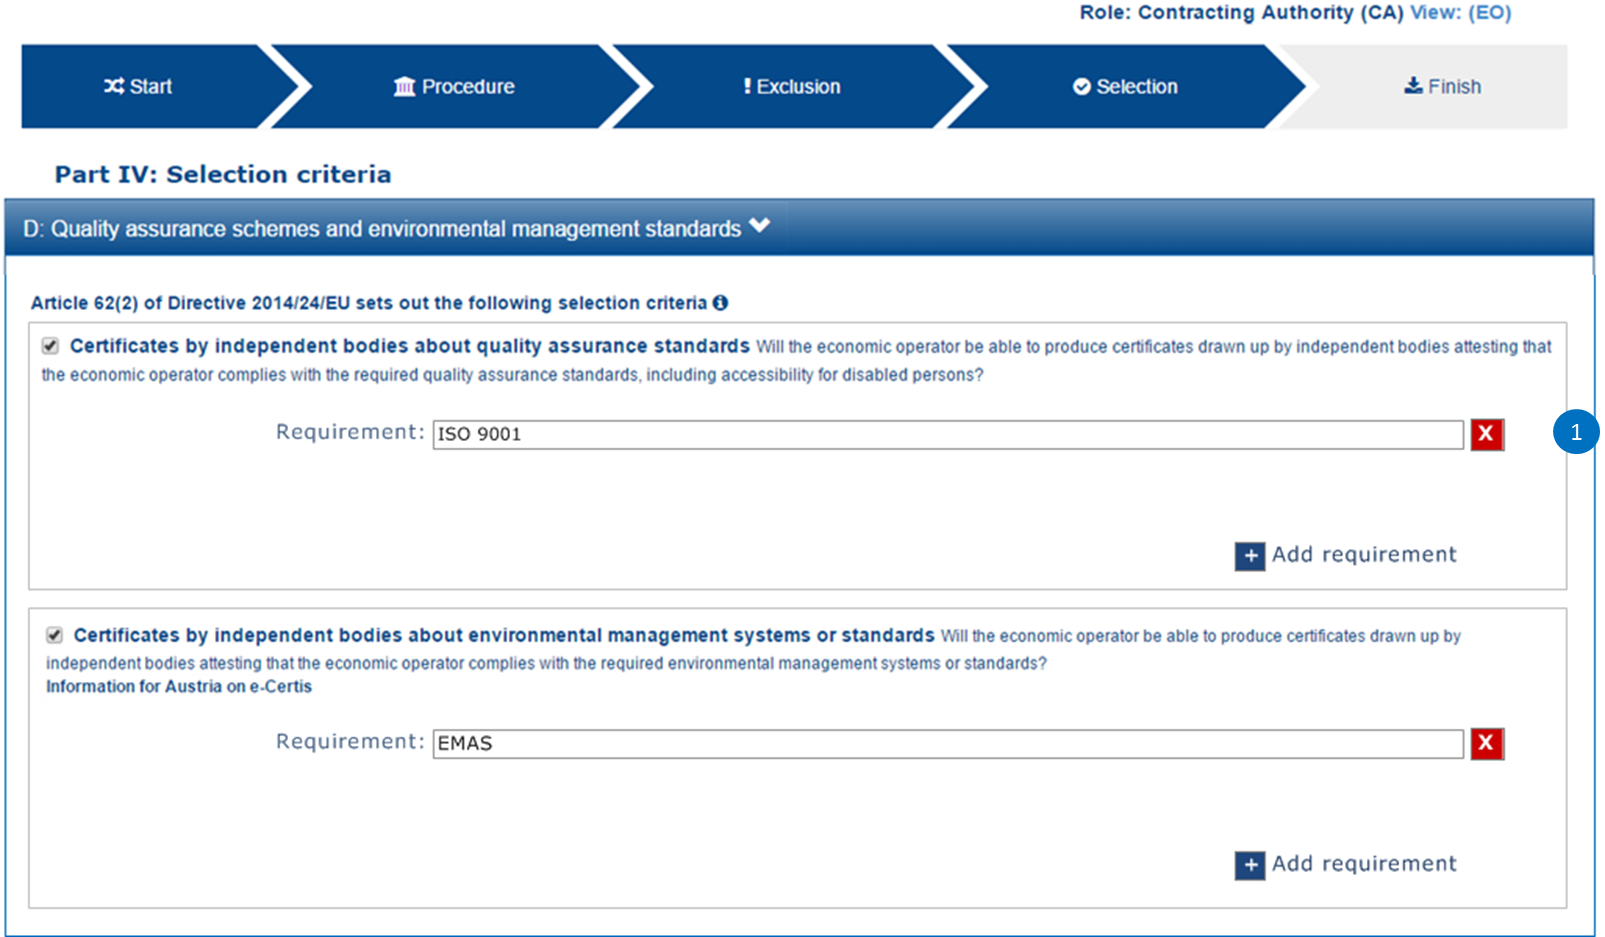 Self-contained 'Quality Assurance schemes and environmental management standards' CA mock-up